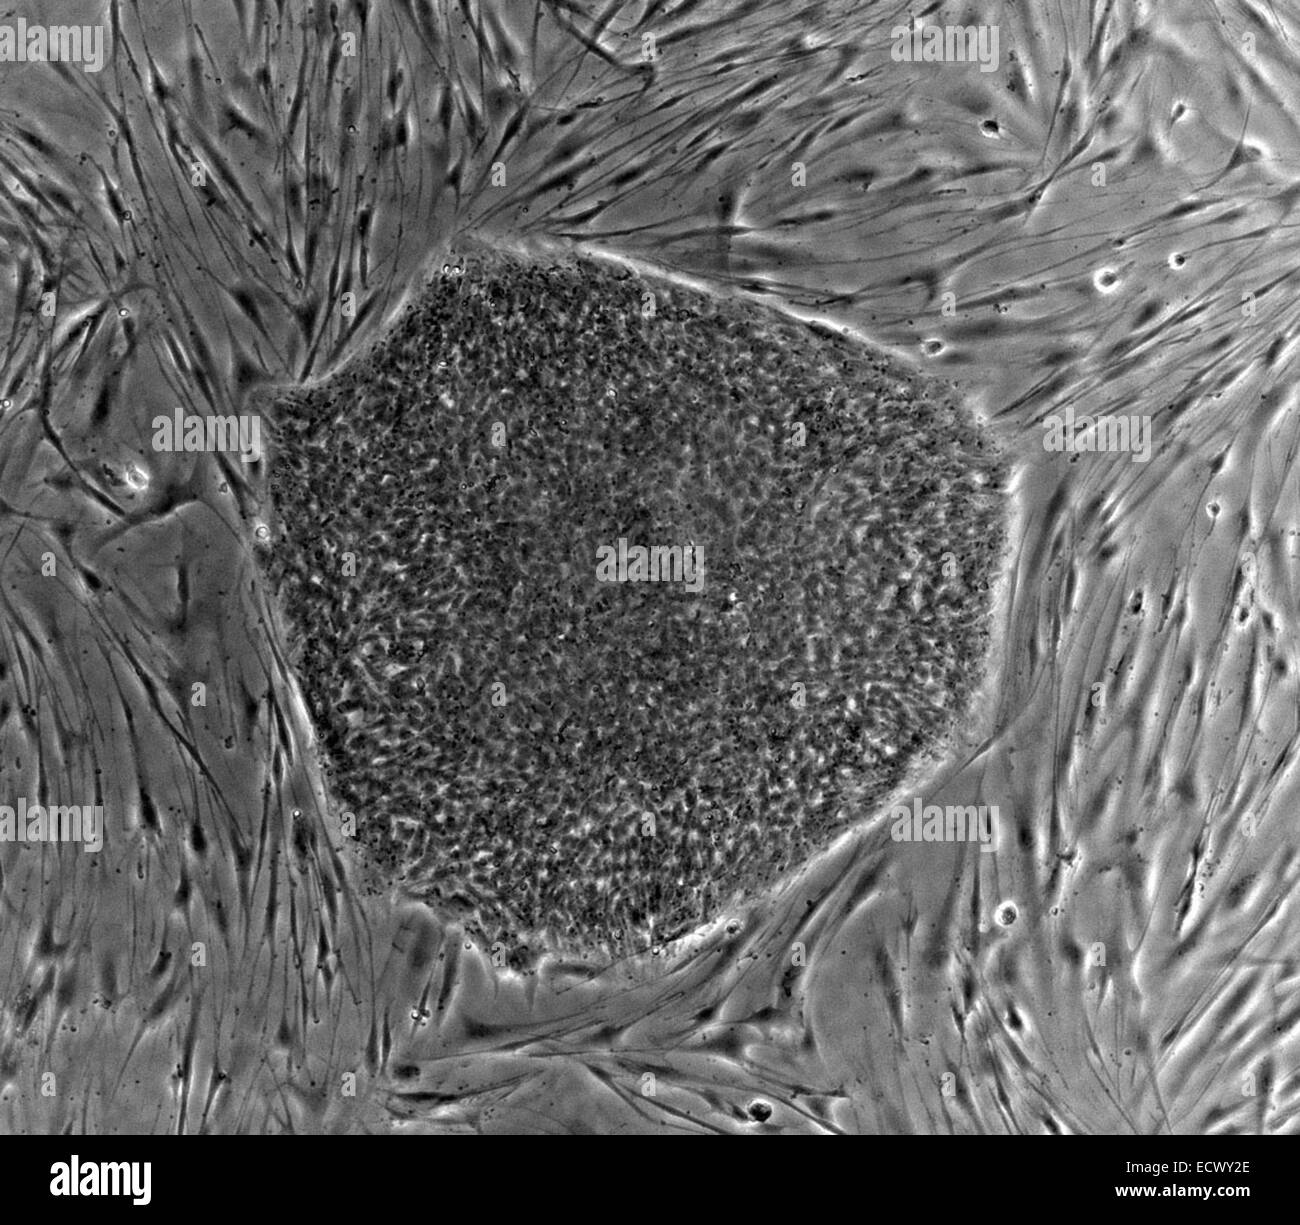 Human embryonic stem cell colony. Stock Photo